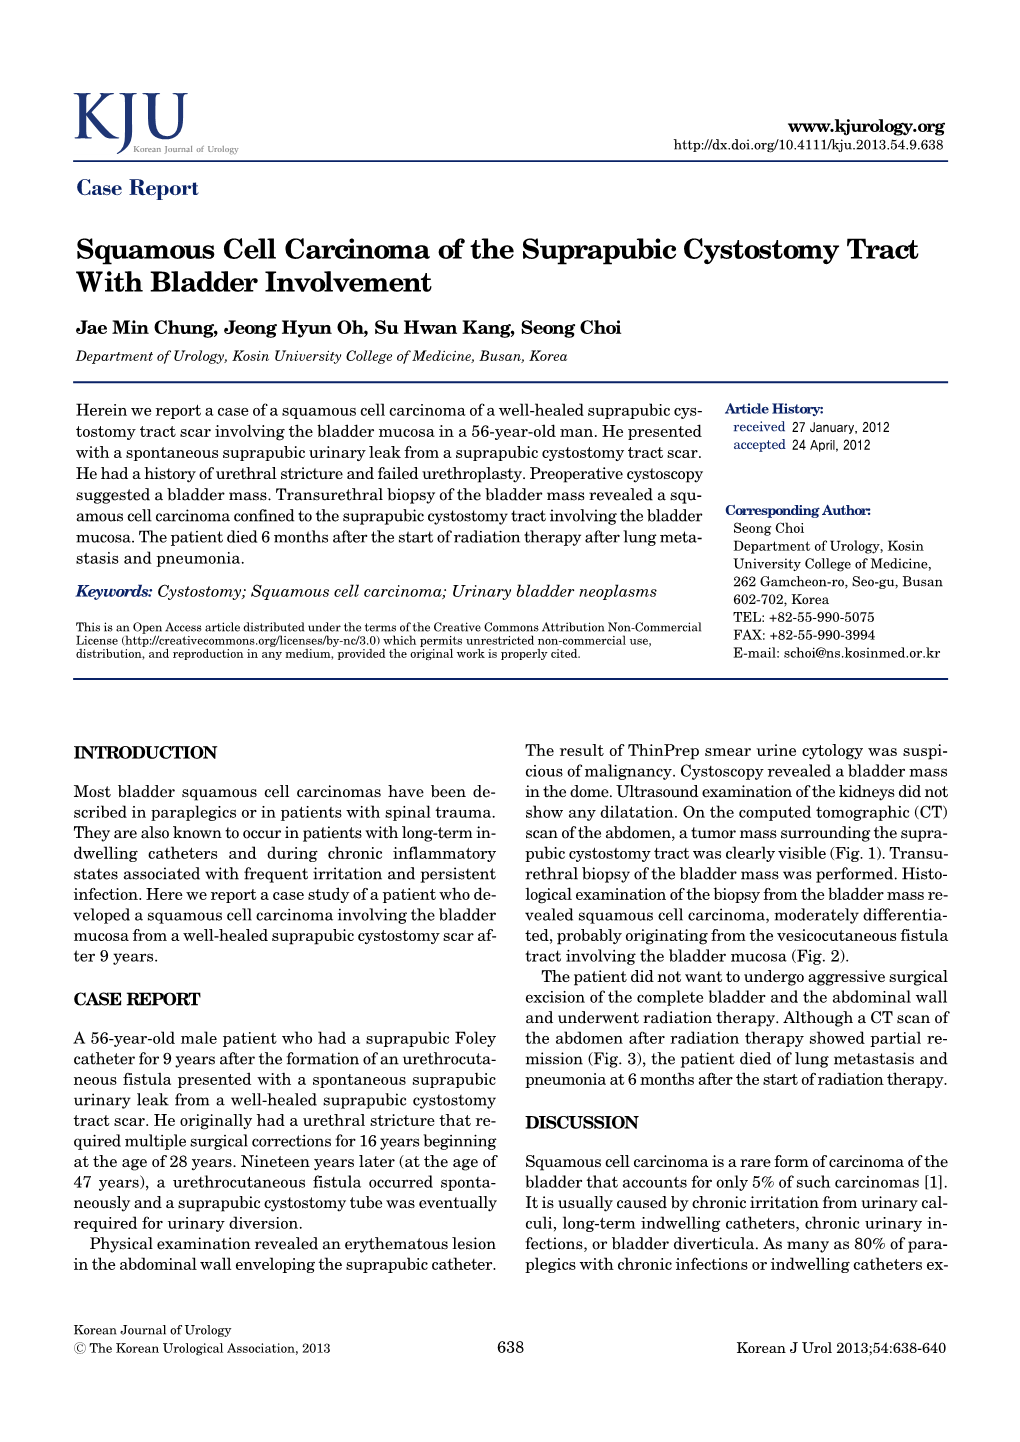 Squamous Cell Carcinoma of the Suprapubic Cystostomy Tract with Bladder Involvement